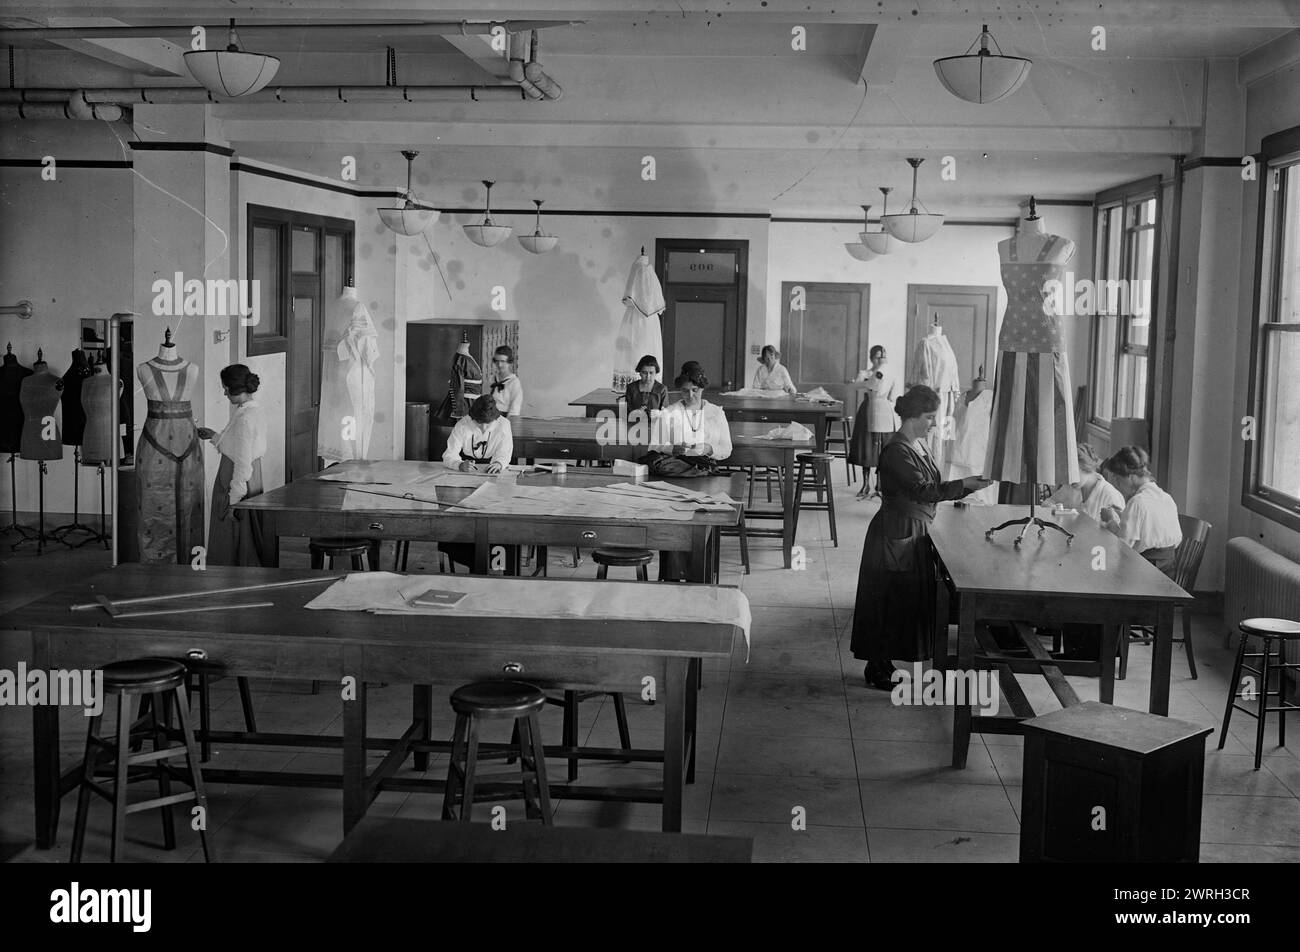 Y.W.C.A., between c1915 and 1918. Women making dresses at the Y.W.C.A during World War I. One dress has a striped skirt and star-patterned top which resembles an American flag. Stock Photo